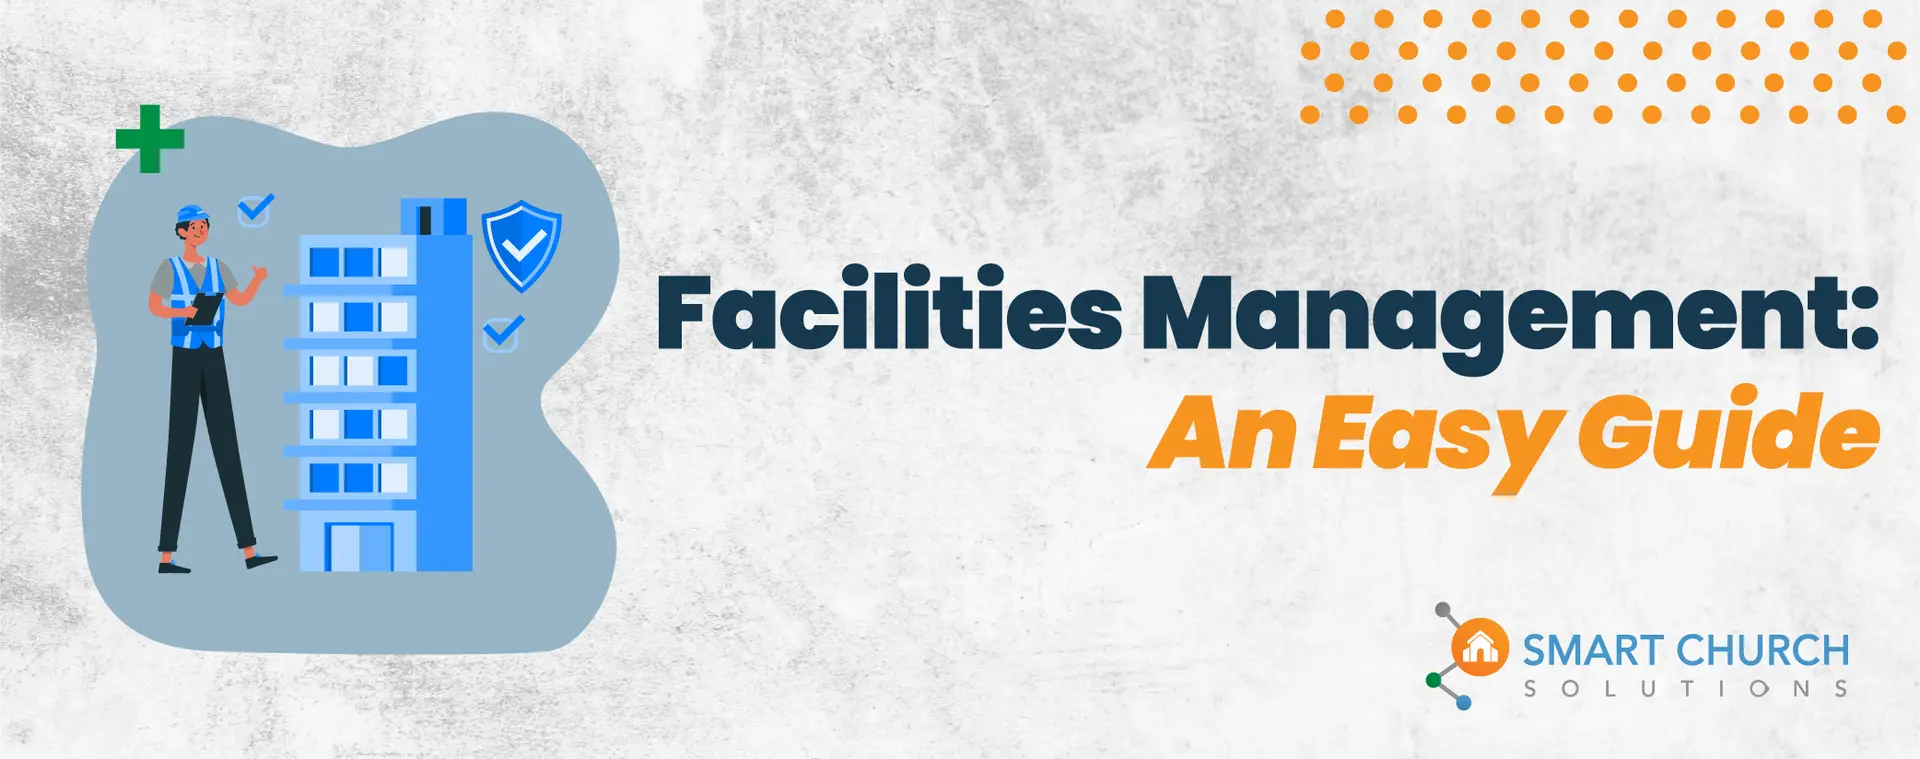 a guide to facilities management blog hero image